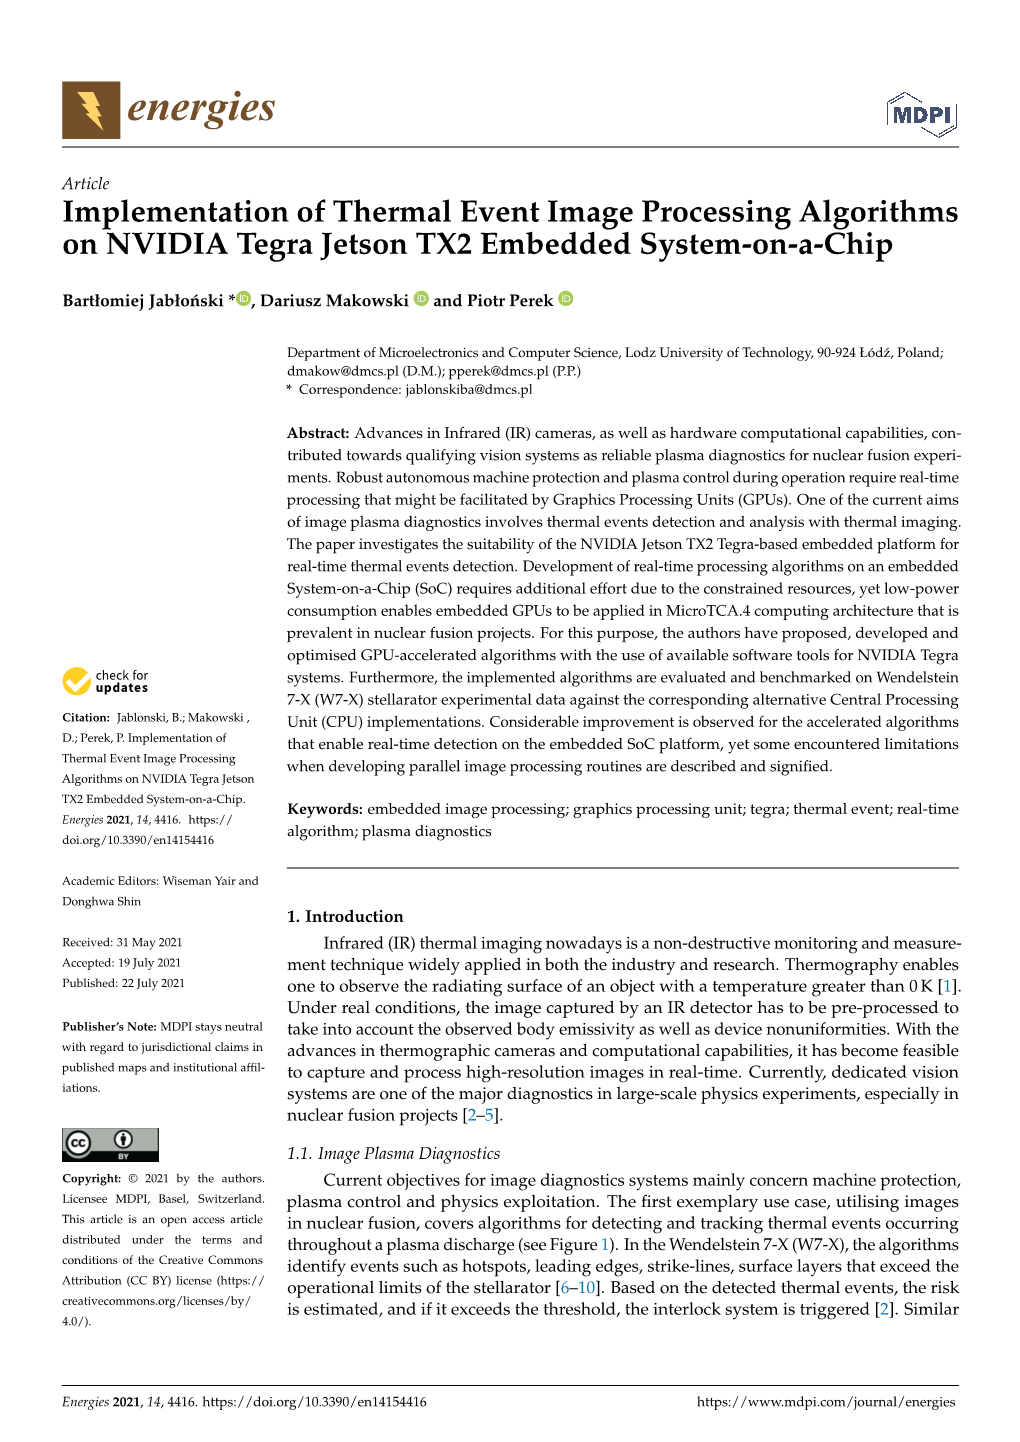 Implementation of Thermal Event Image Processing Algorithms on NVIDIA Tegra Jetson TX2 Embedded System-On-A-Chip